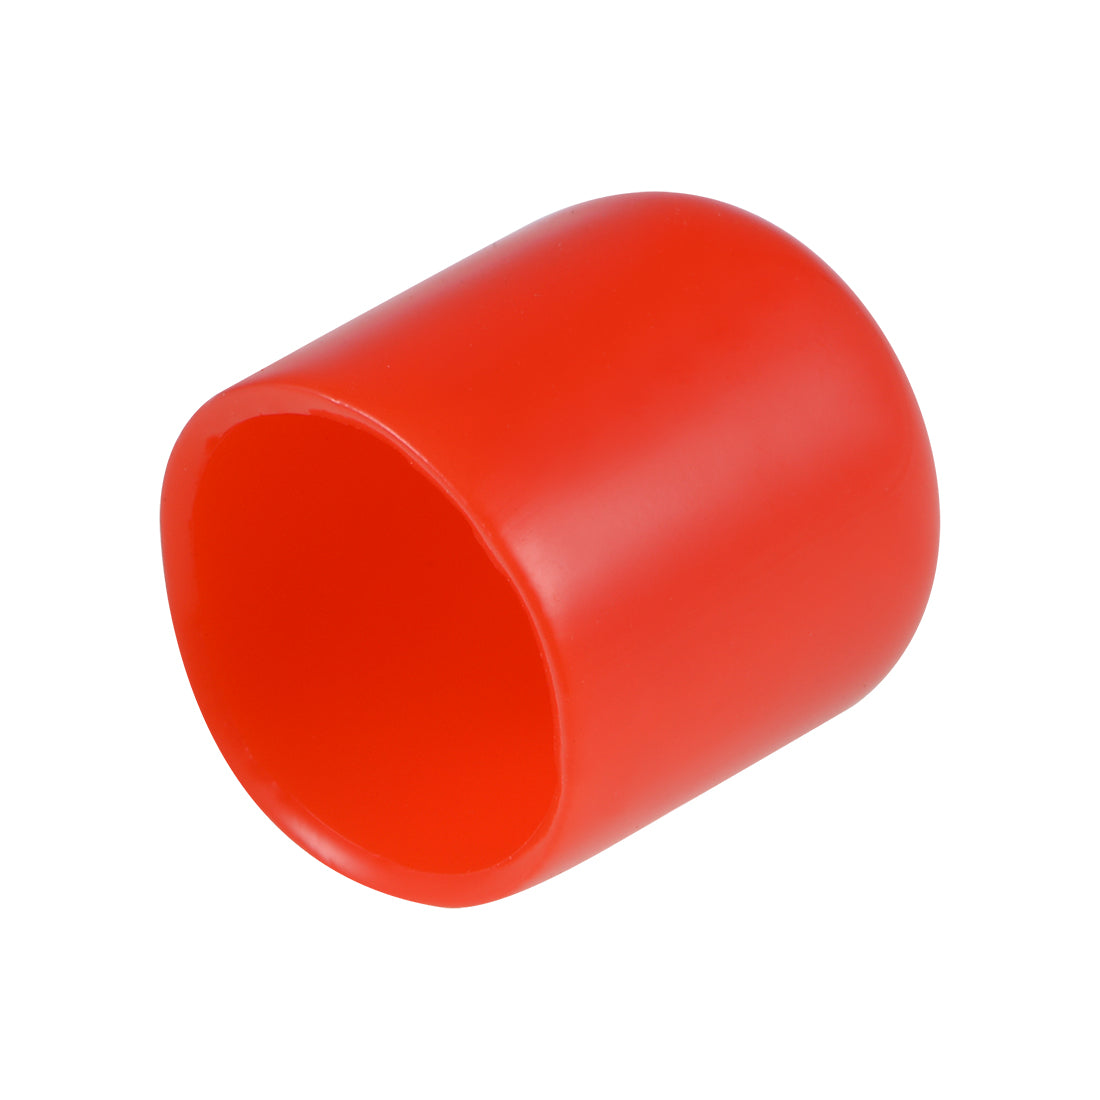 uxcell Uxcell 25pcs Rubber End Caps 17mm ID 20mm Height Screw Thread Protectors Red